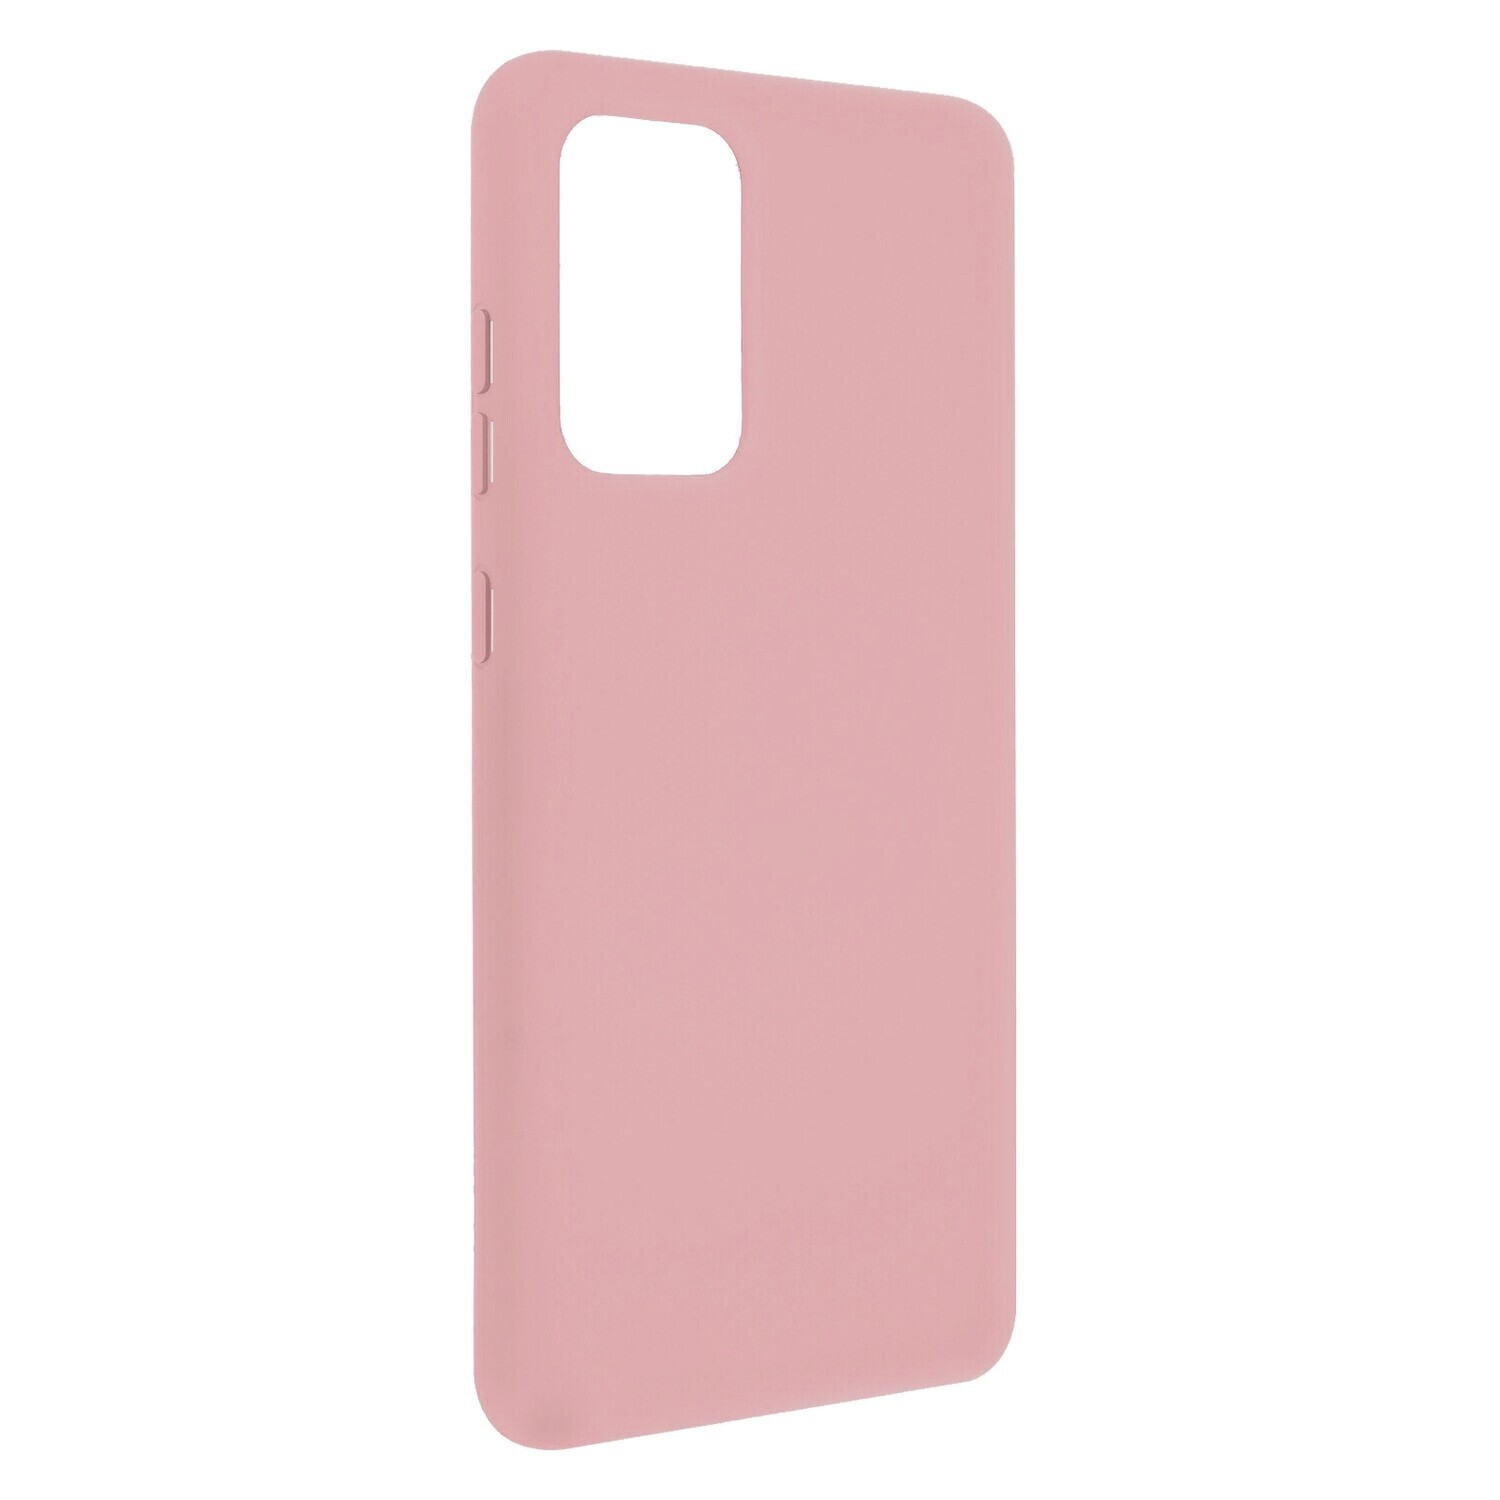 iPhone: cover soft touch rosa antico